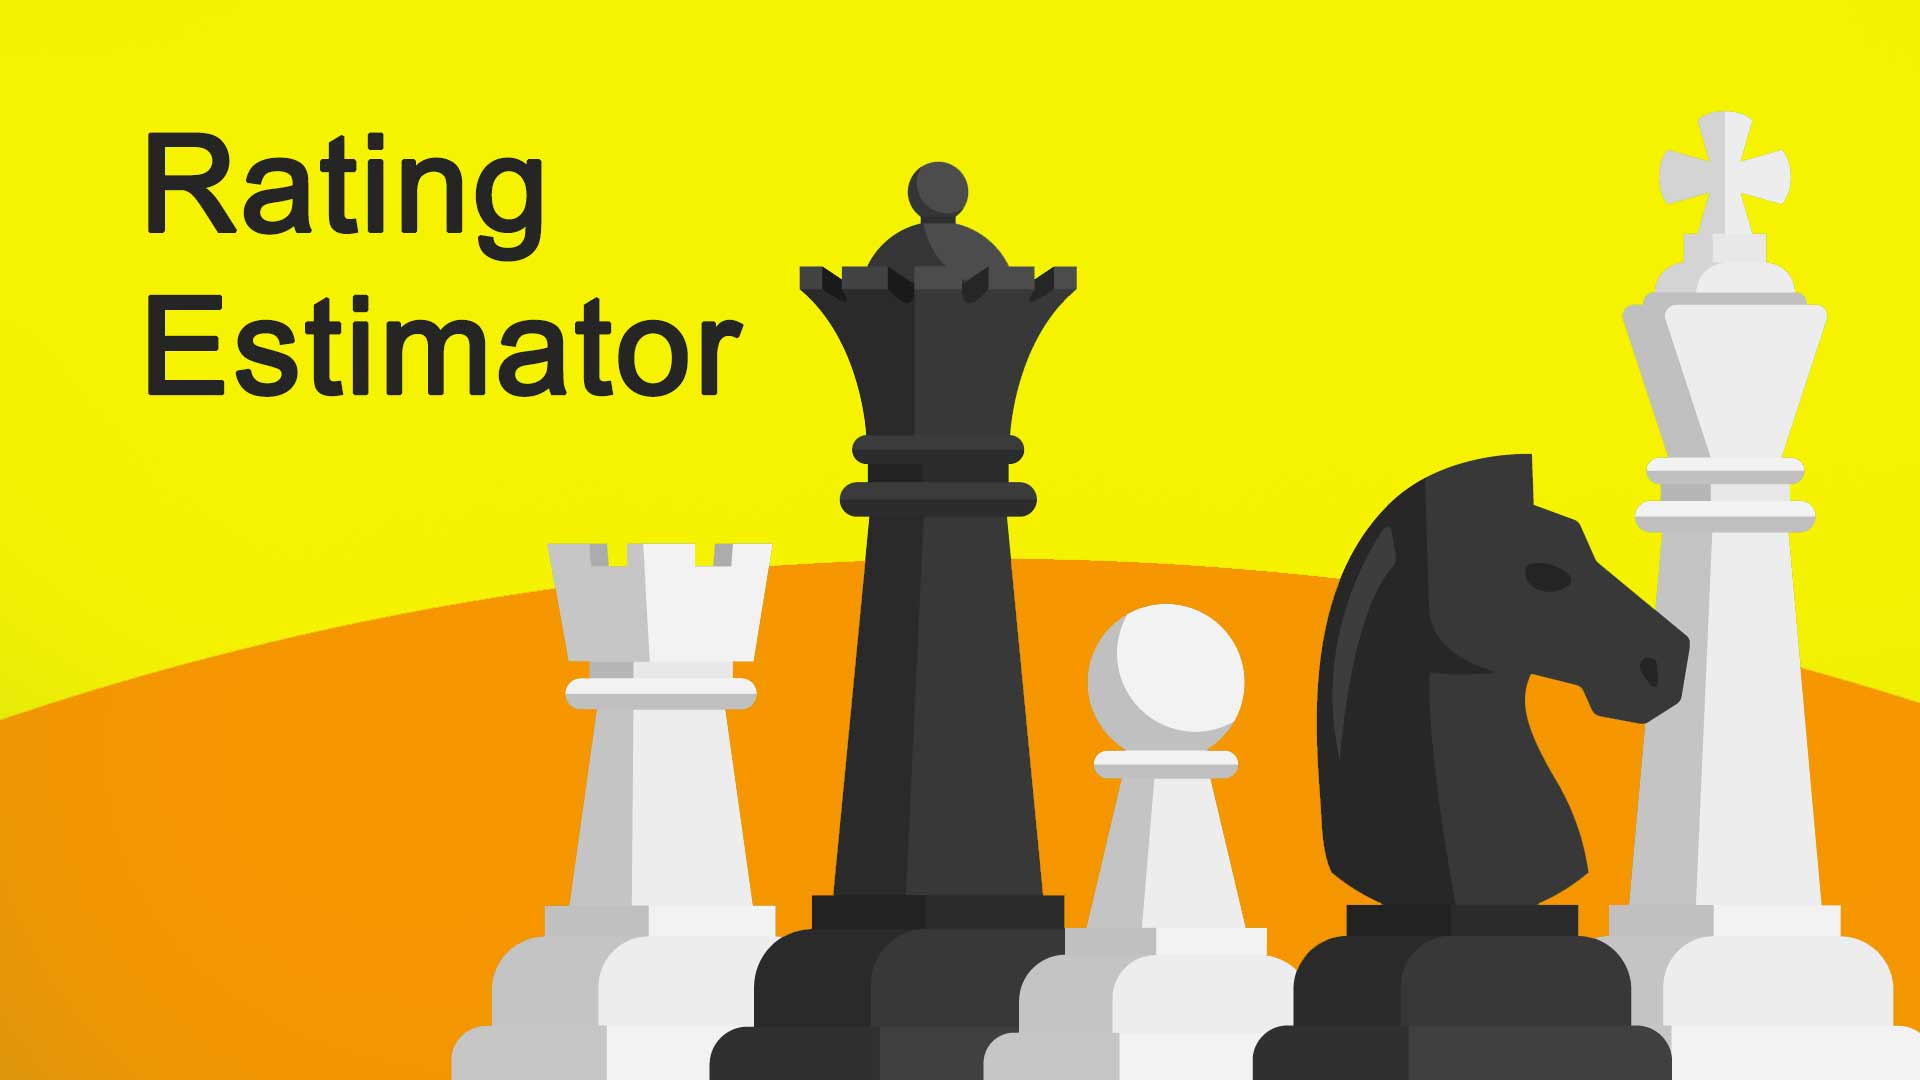 Rating Estimator - Calculate USCF FIDE, CFC and Chess Ratings